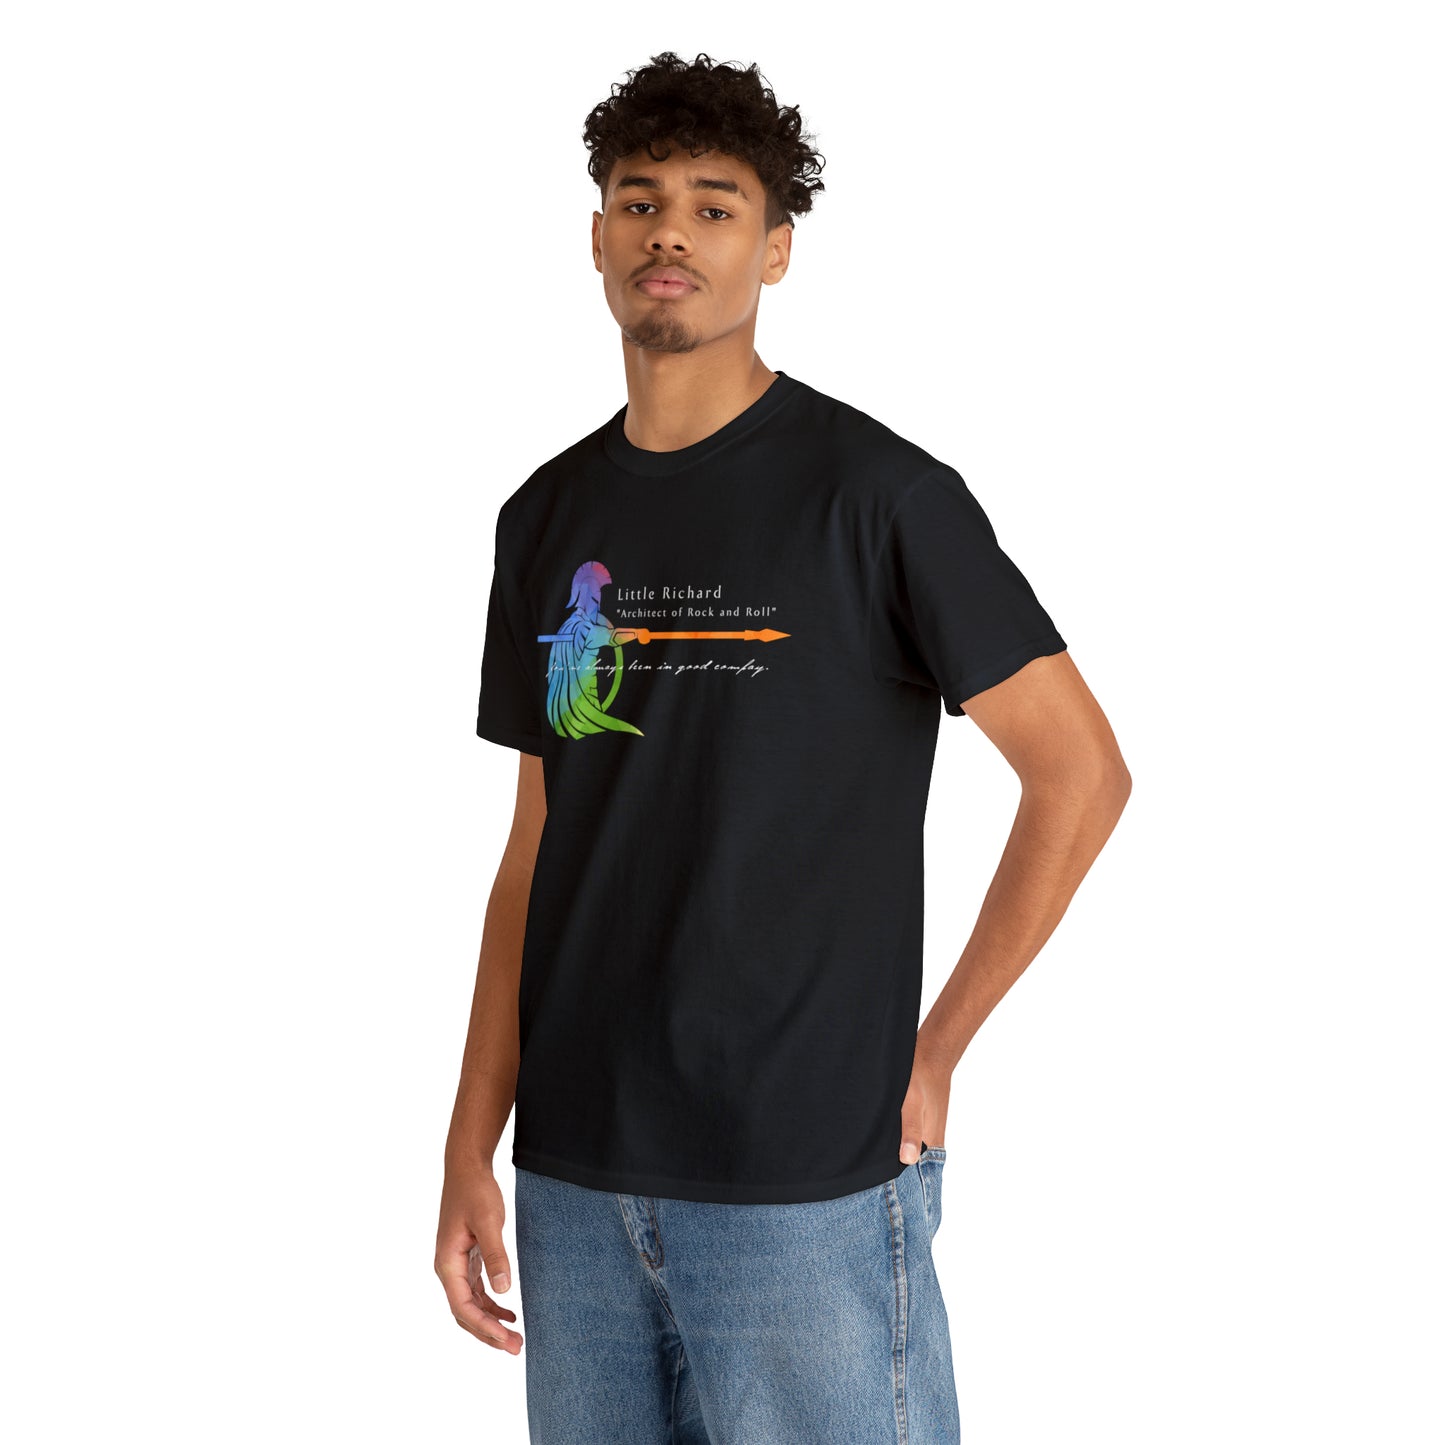 Little Richard | "Architect of Rock and Roll" | Pride T-Shirt